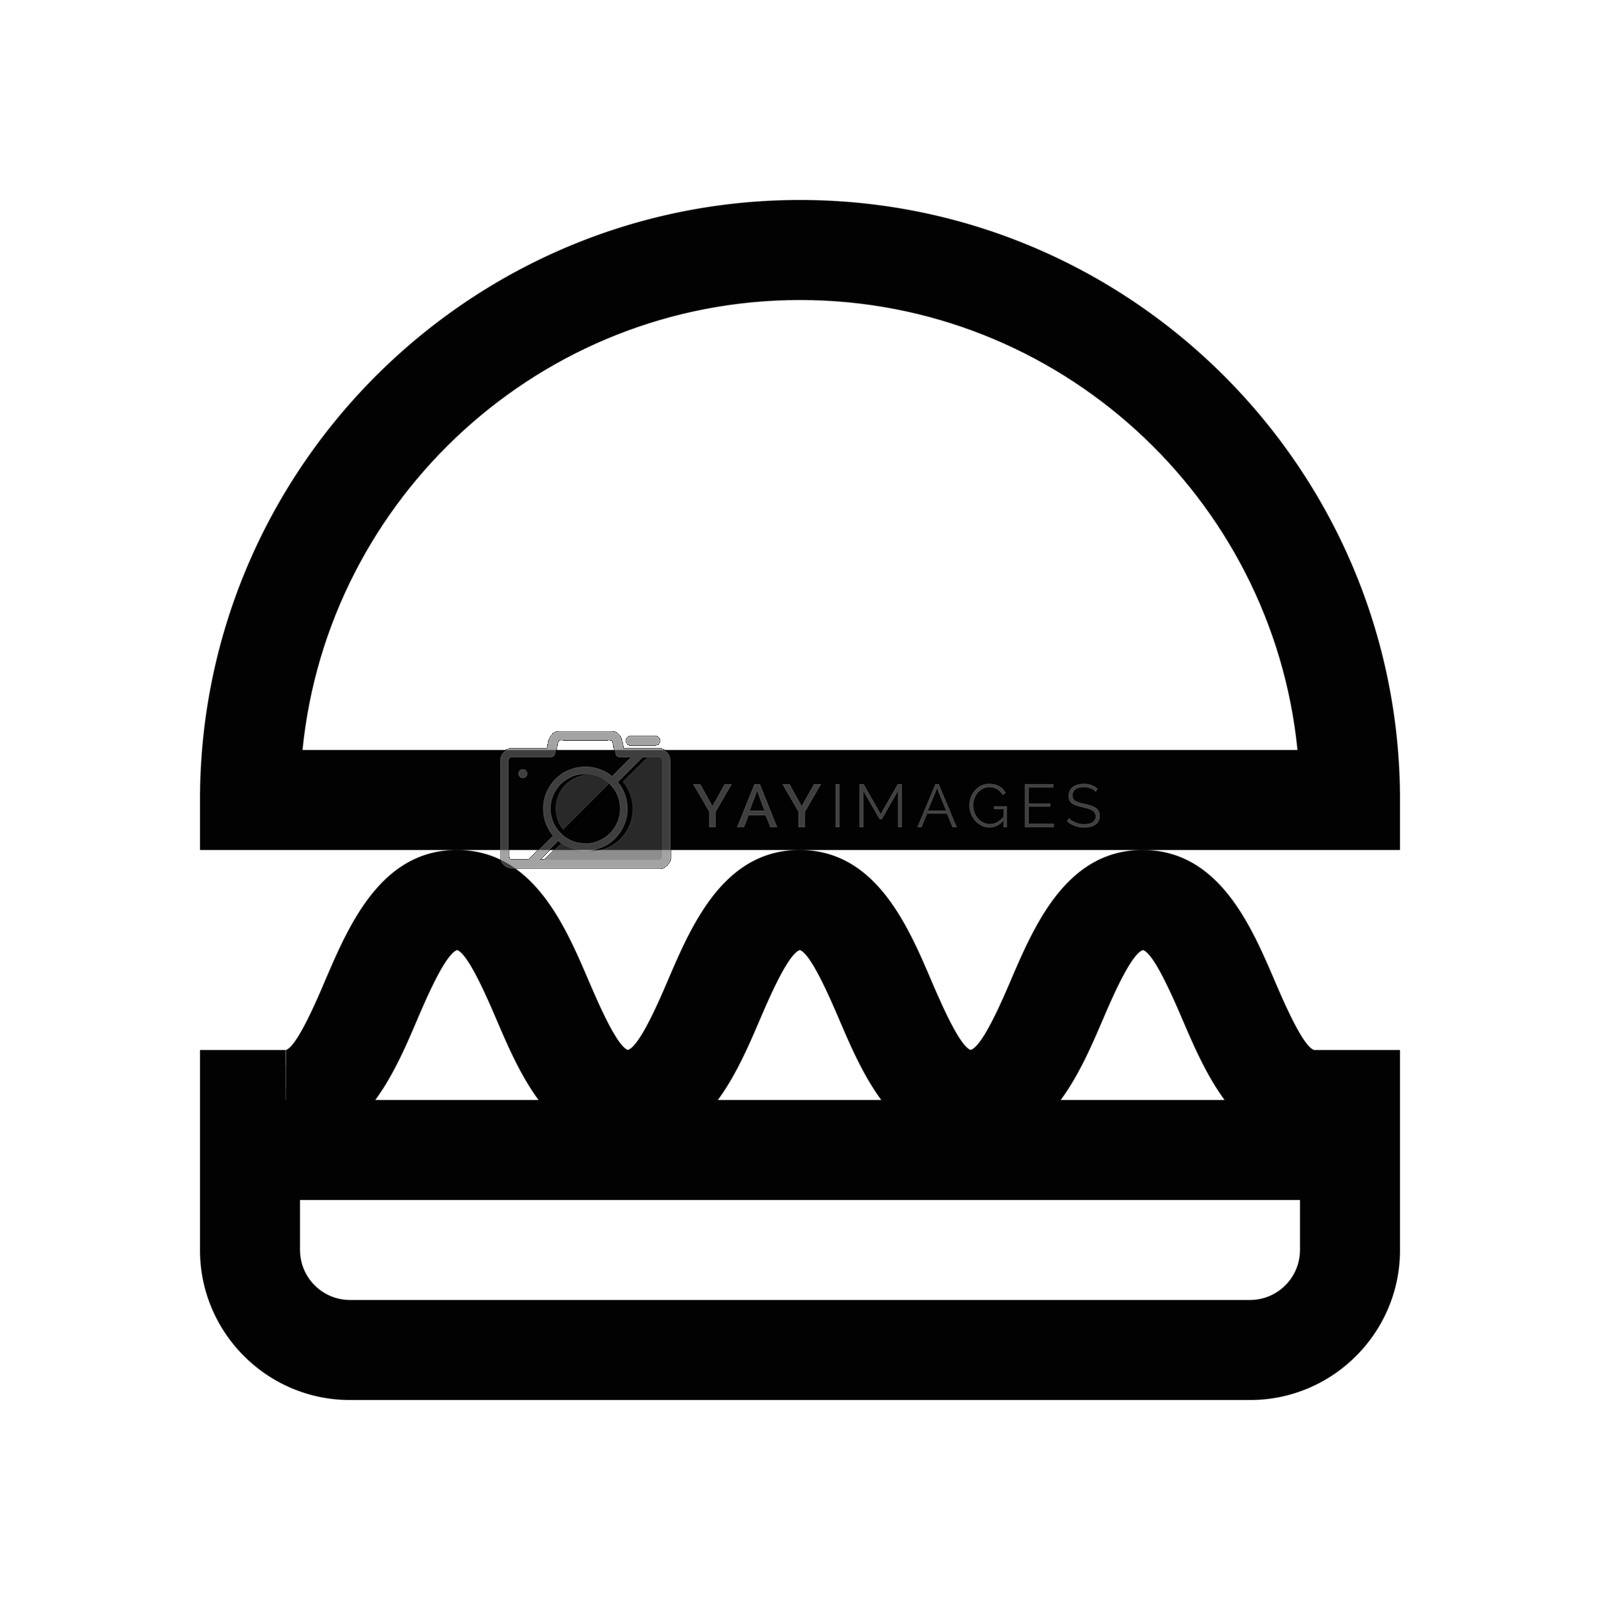 Royalty free image of fast food by vectorstall